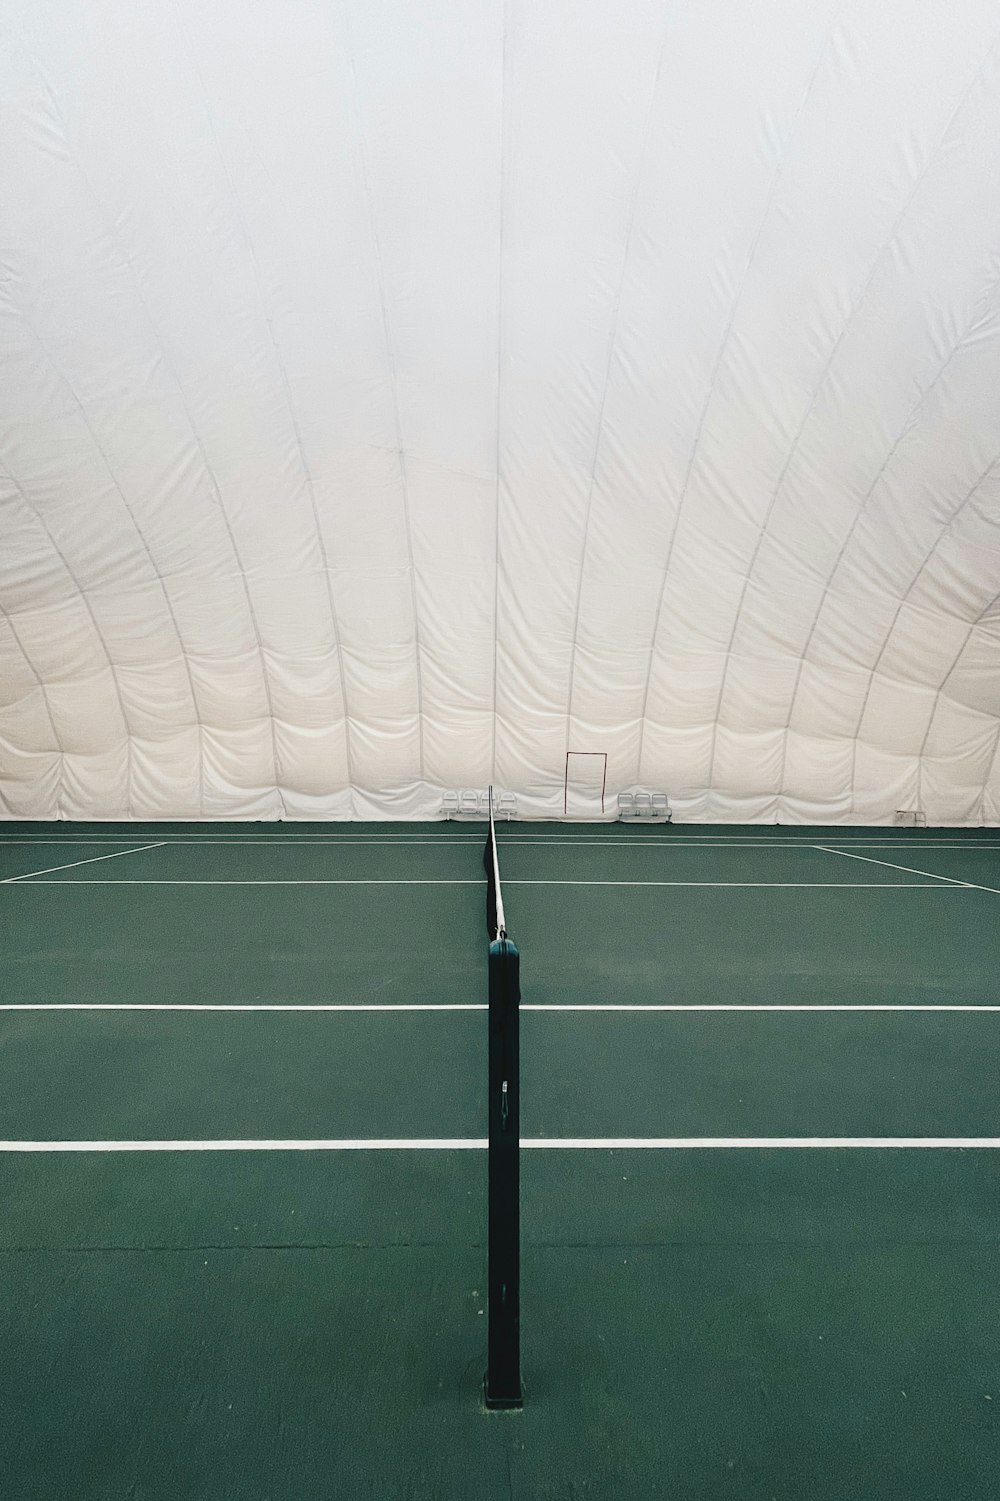 a tennis court with a white tent in the background